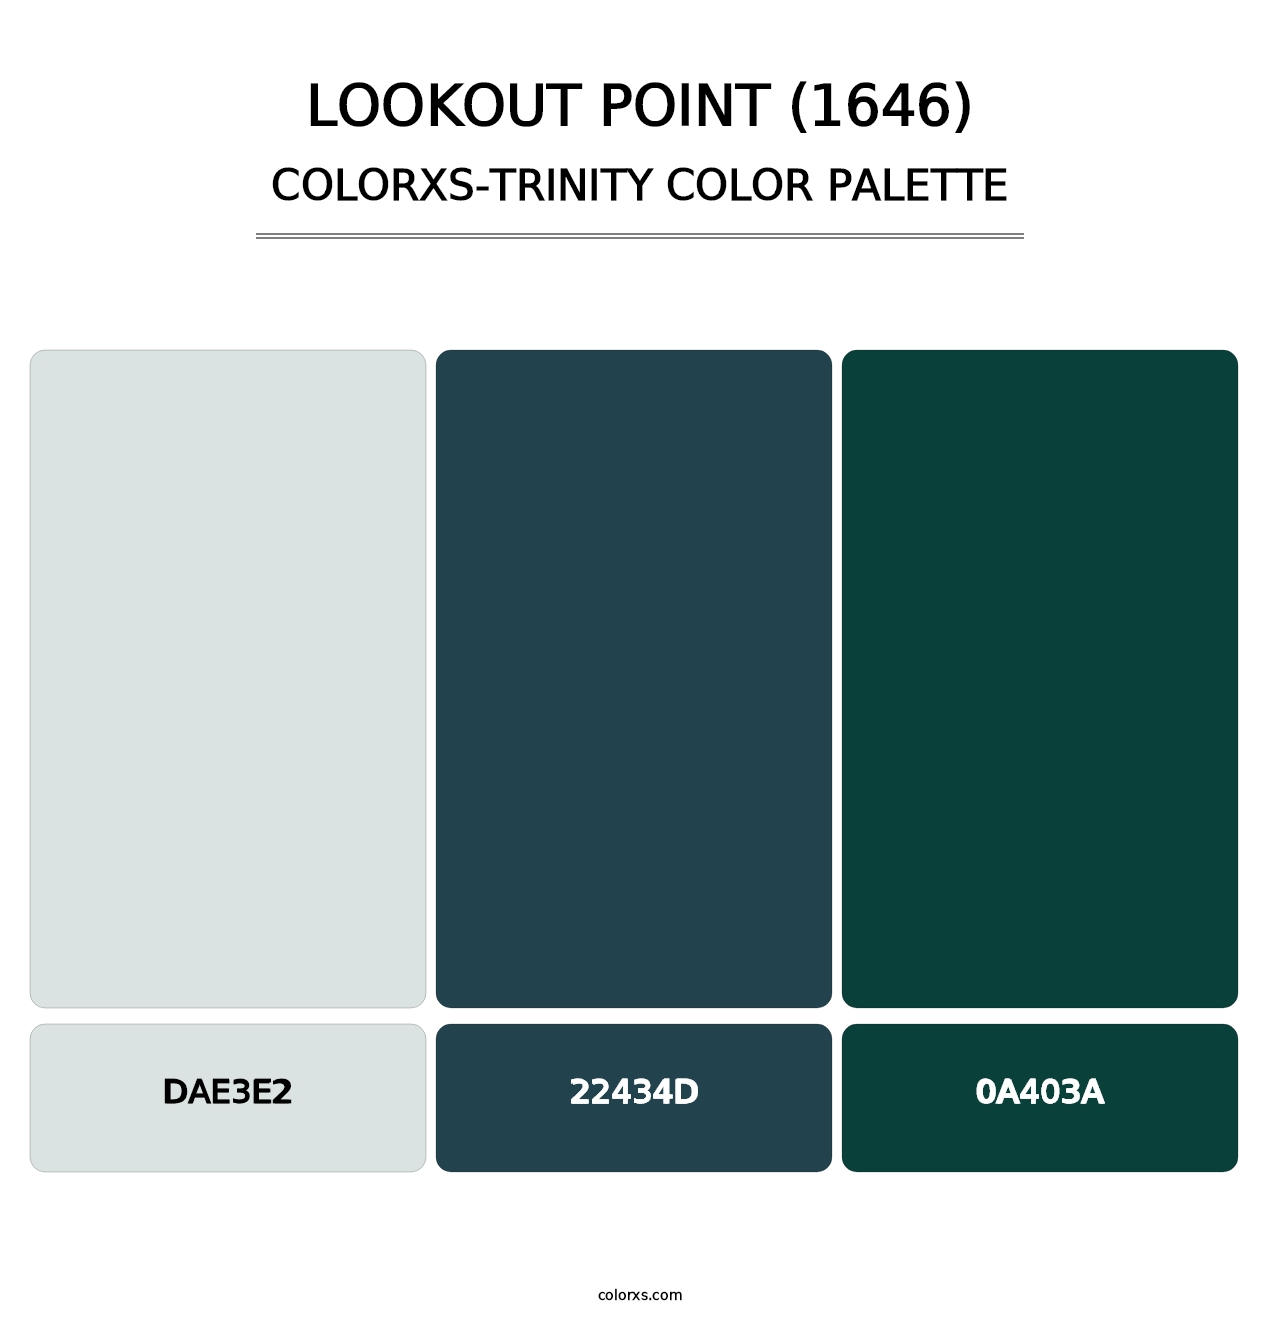 Lookout Point (1646) - Colorxs Trinity Palette